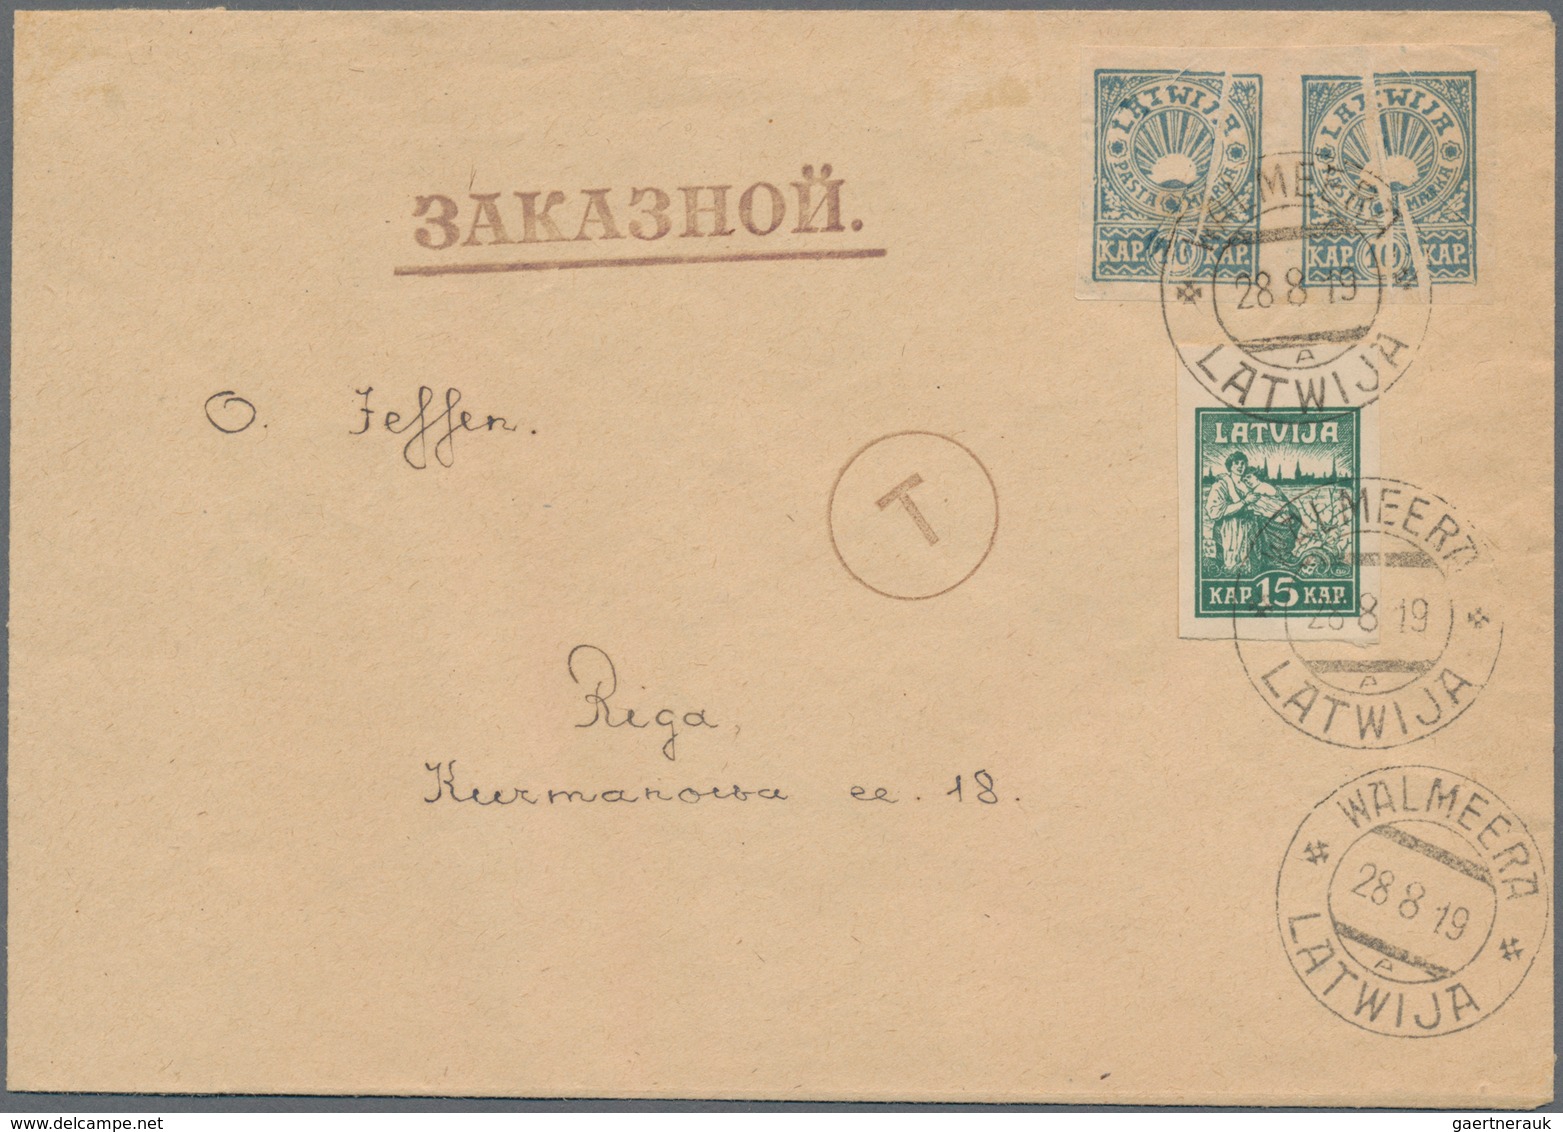 Lettland: 1919 - 1940, Lot Of 19 Covers, While Letters, Postal Stationeries And Postcards With Censo - Letonia